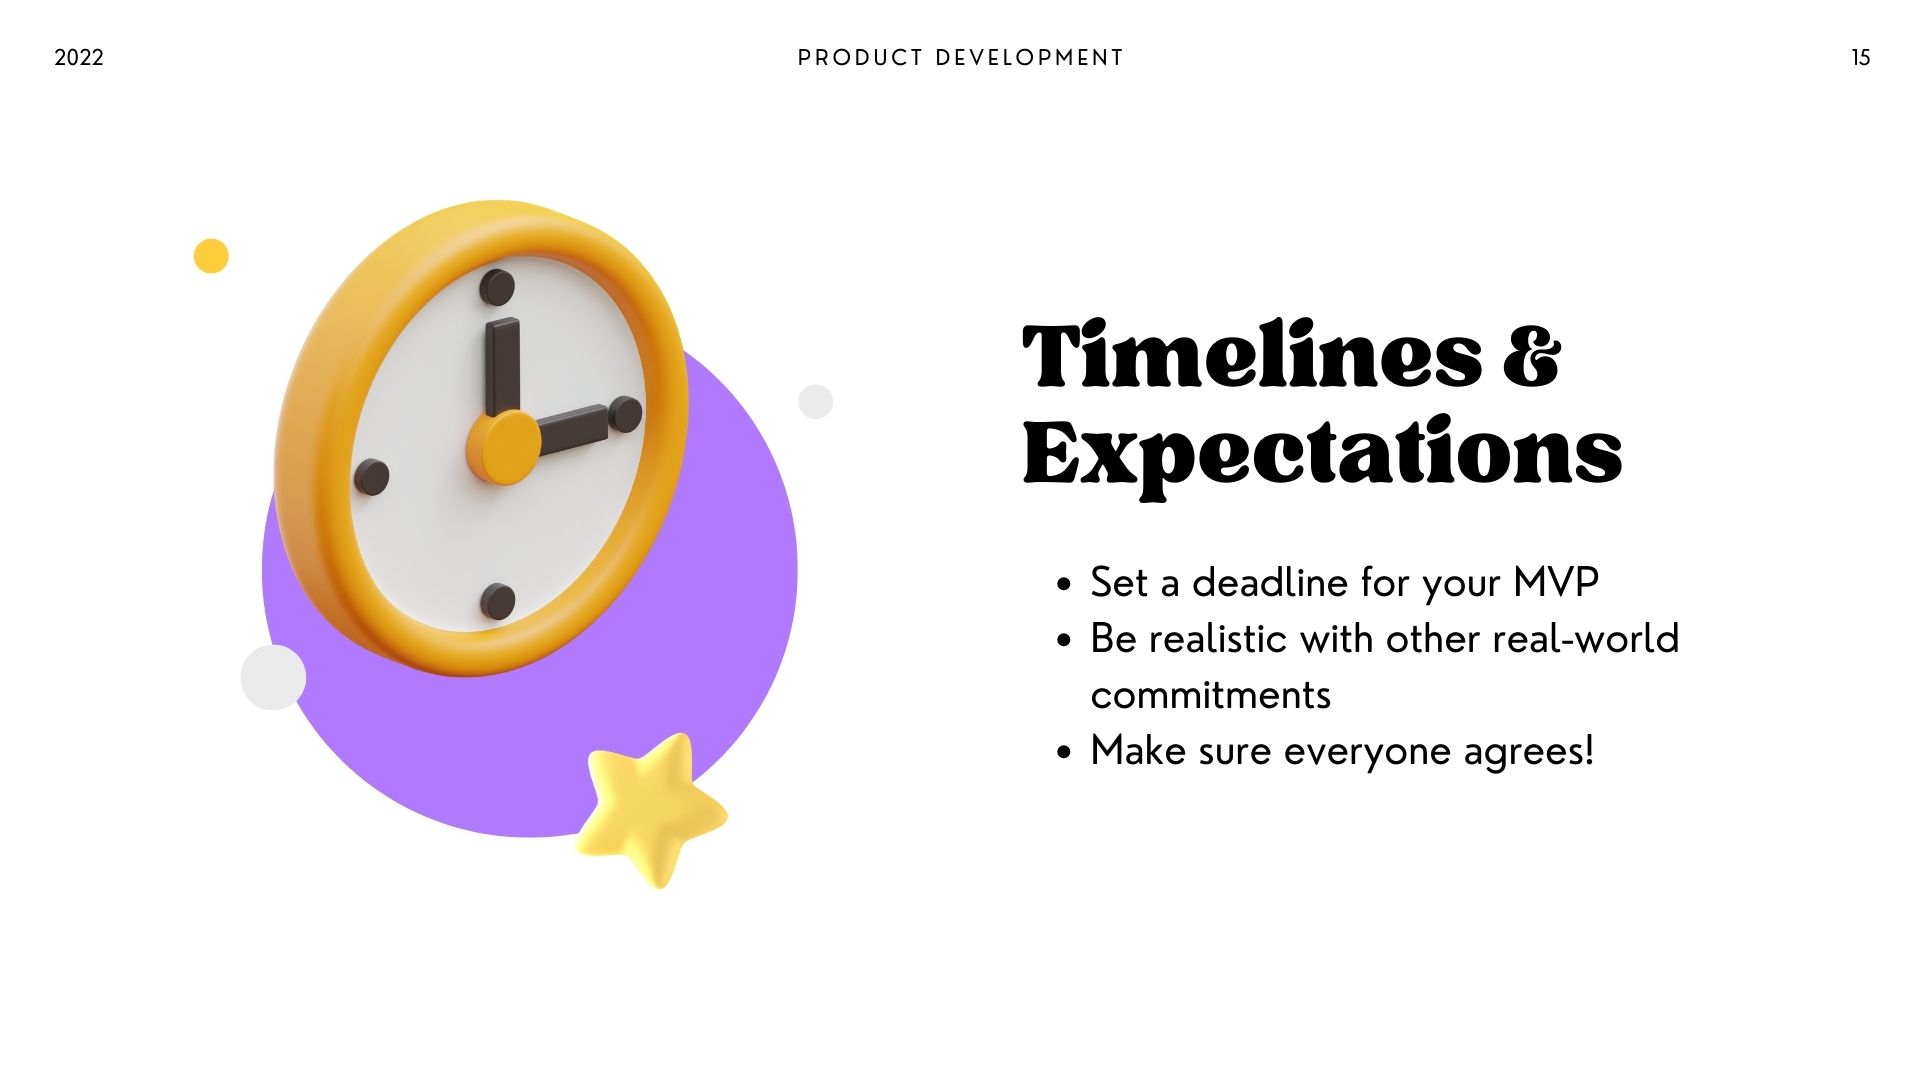 An image showing a clock and asking about product development timelines and expecations